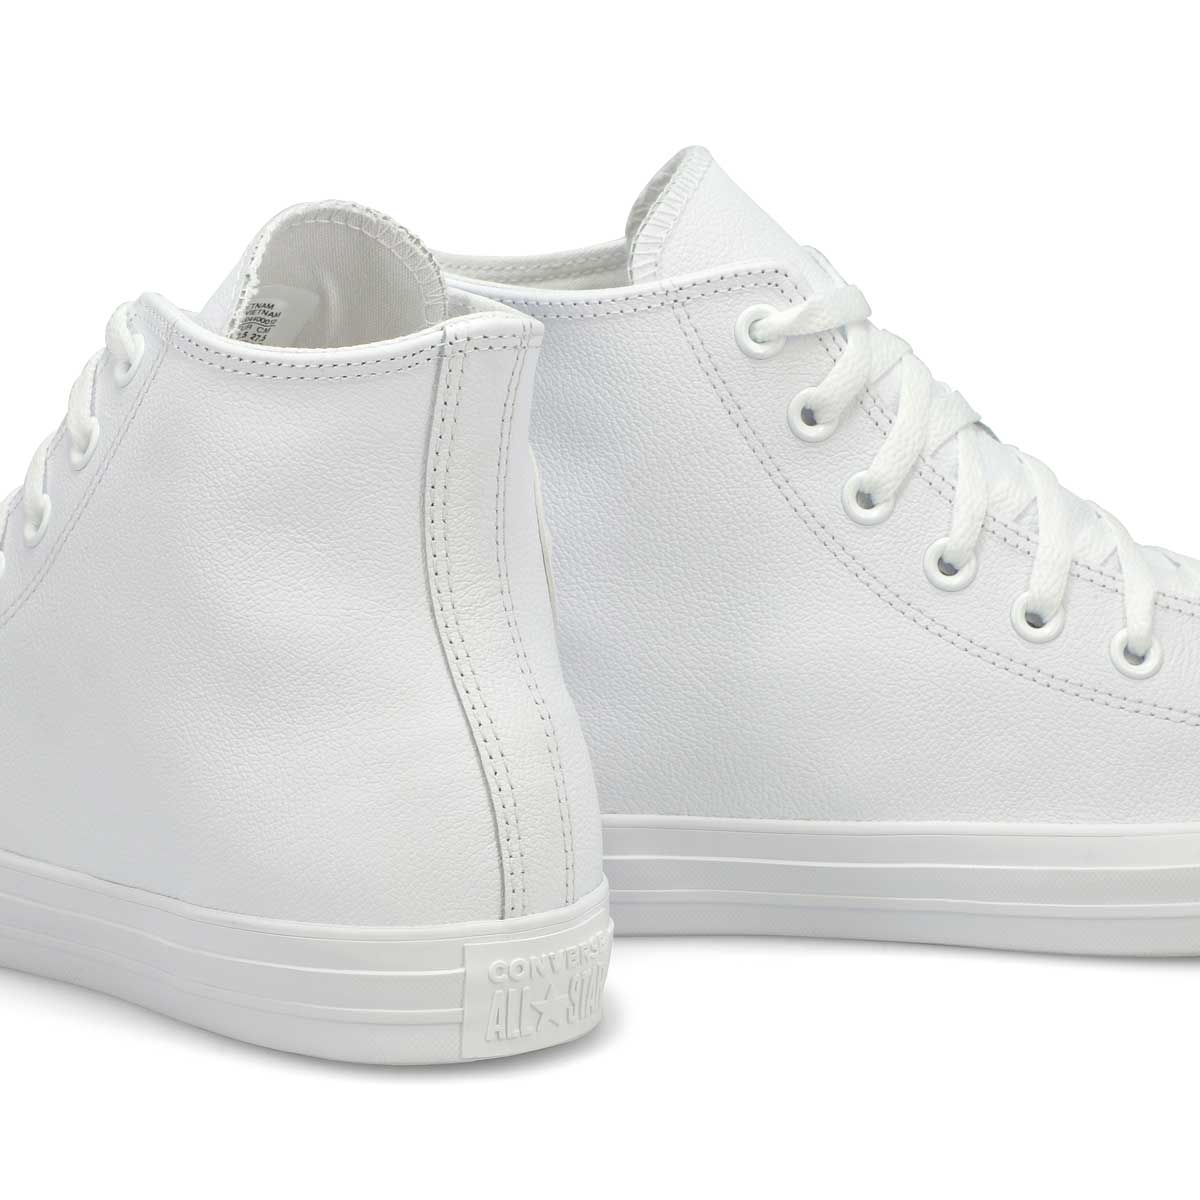 Men's Chuck Taylor All Star Leather Sneaker